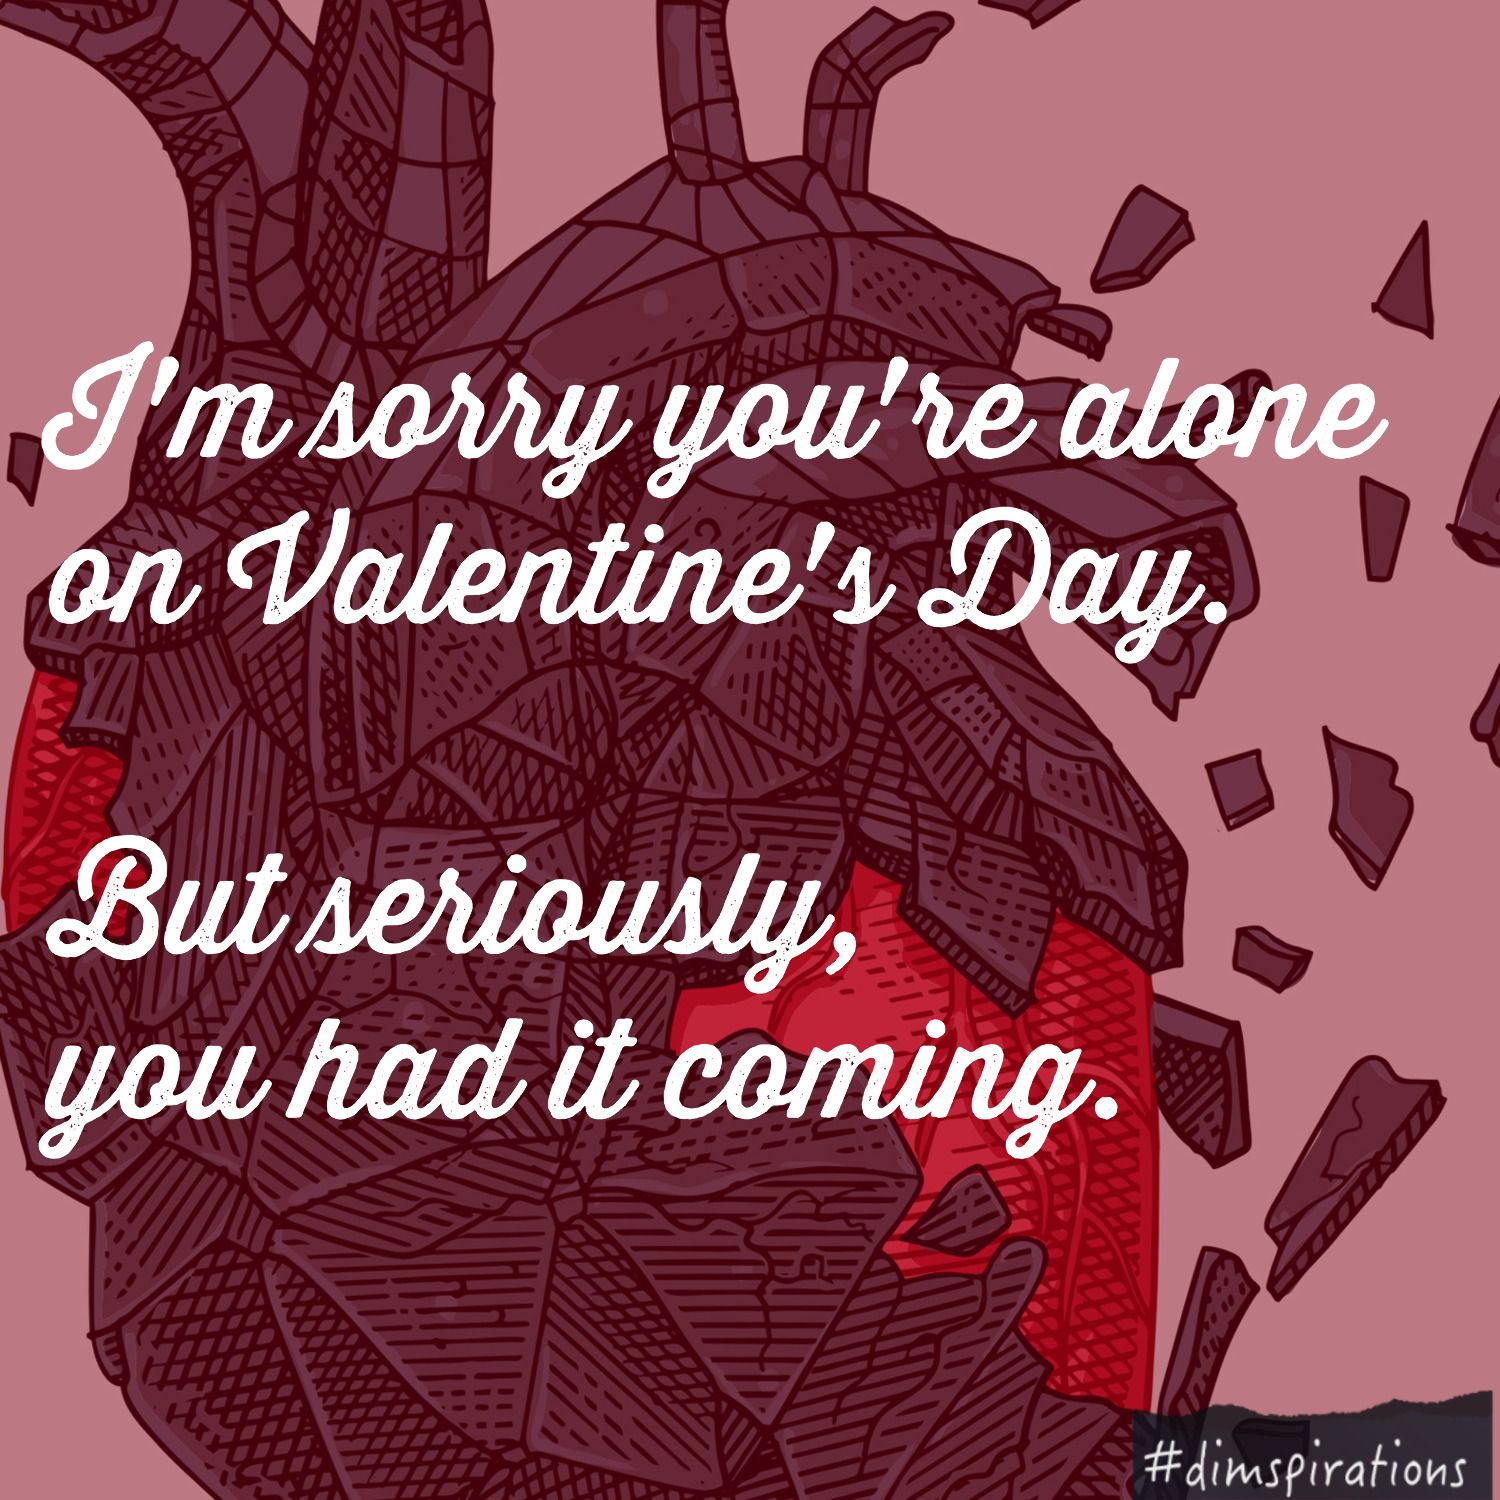 I'm sorry you're alone on Valentine's day, but seriously, you had it coming.